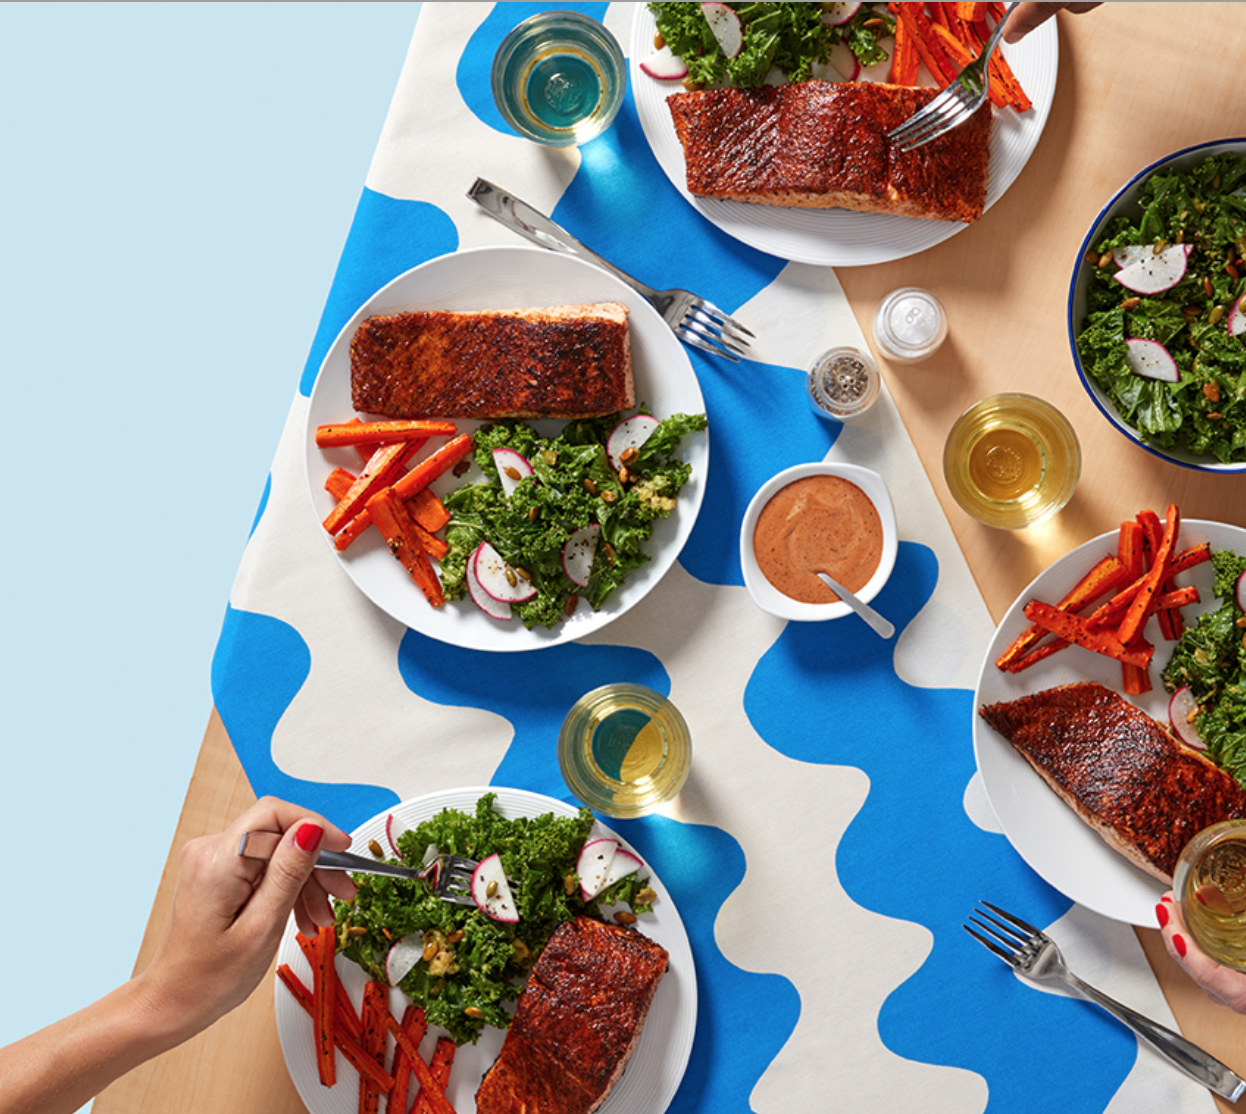 Blue Apron Black Friday Deal – Save $84 Off Your First Four Weeks!